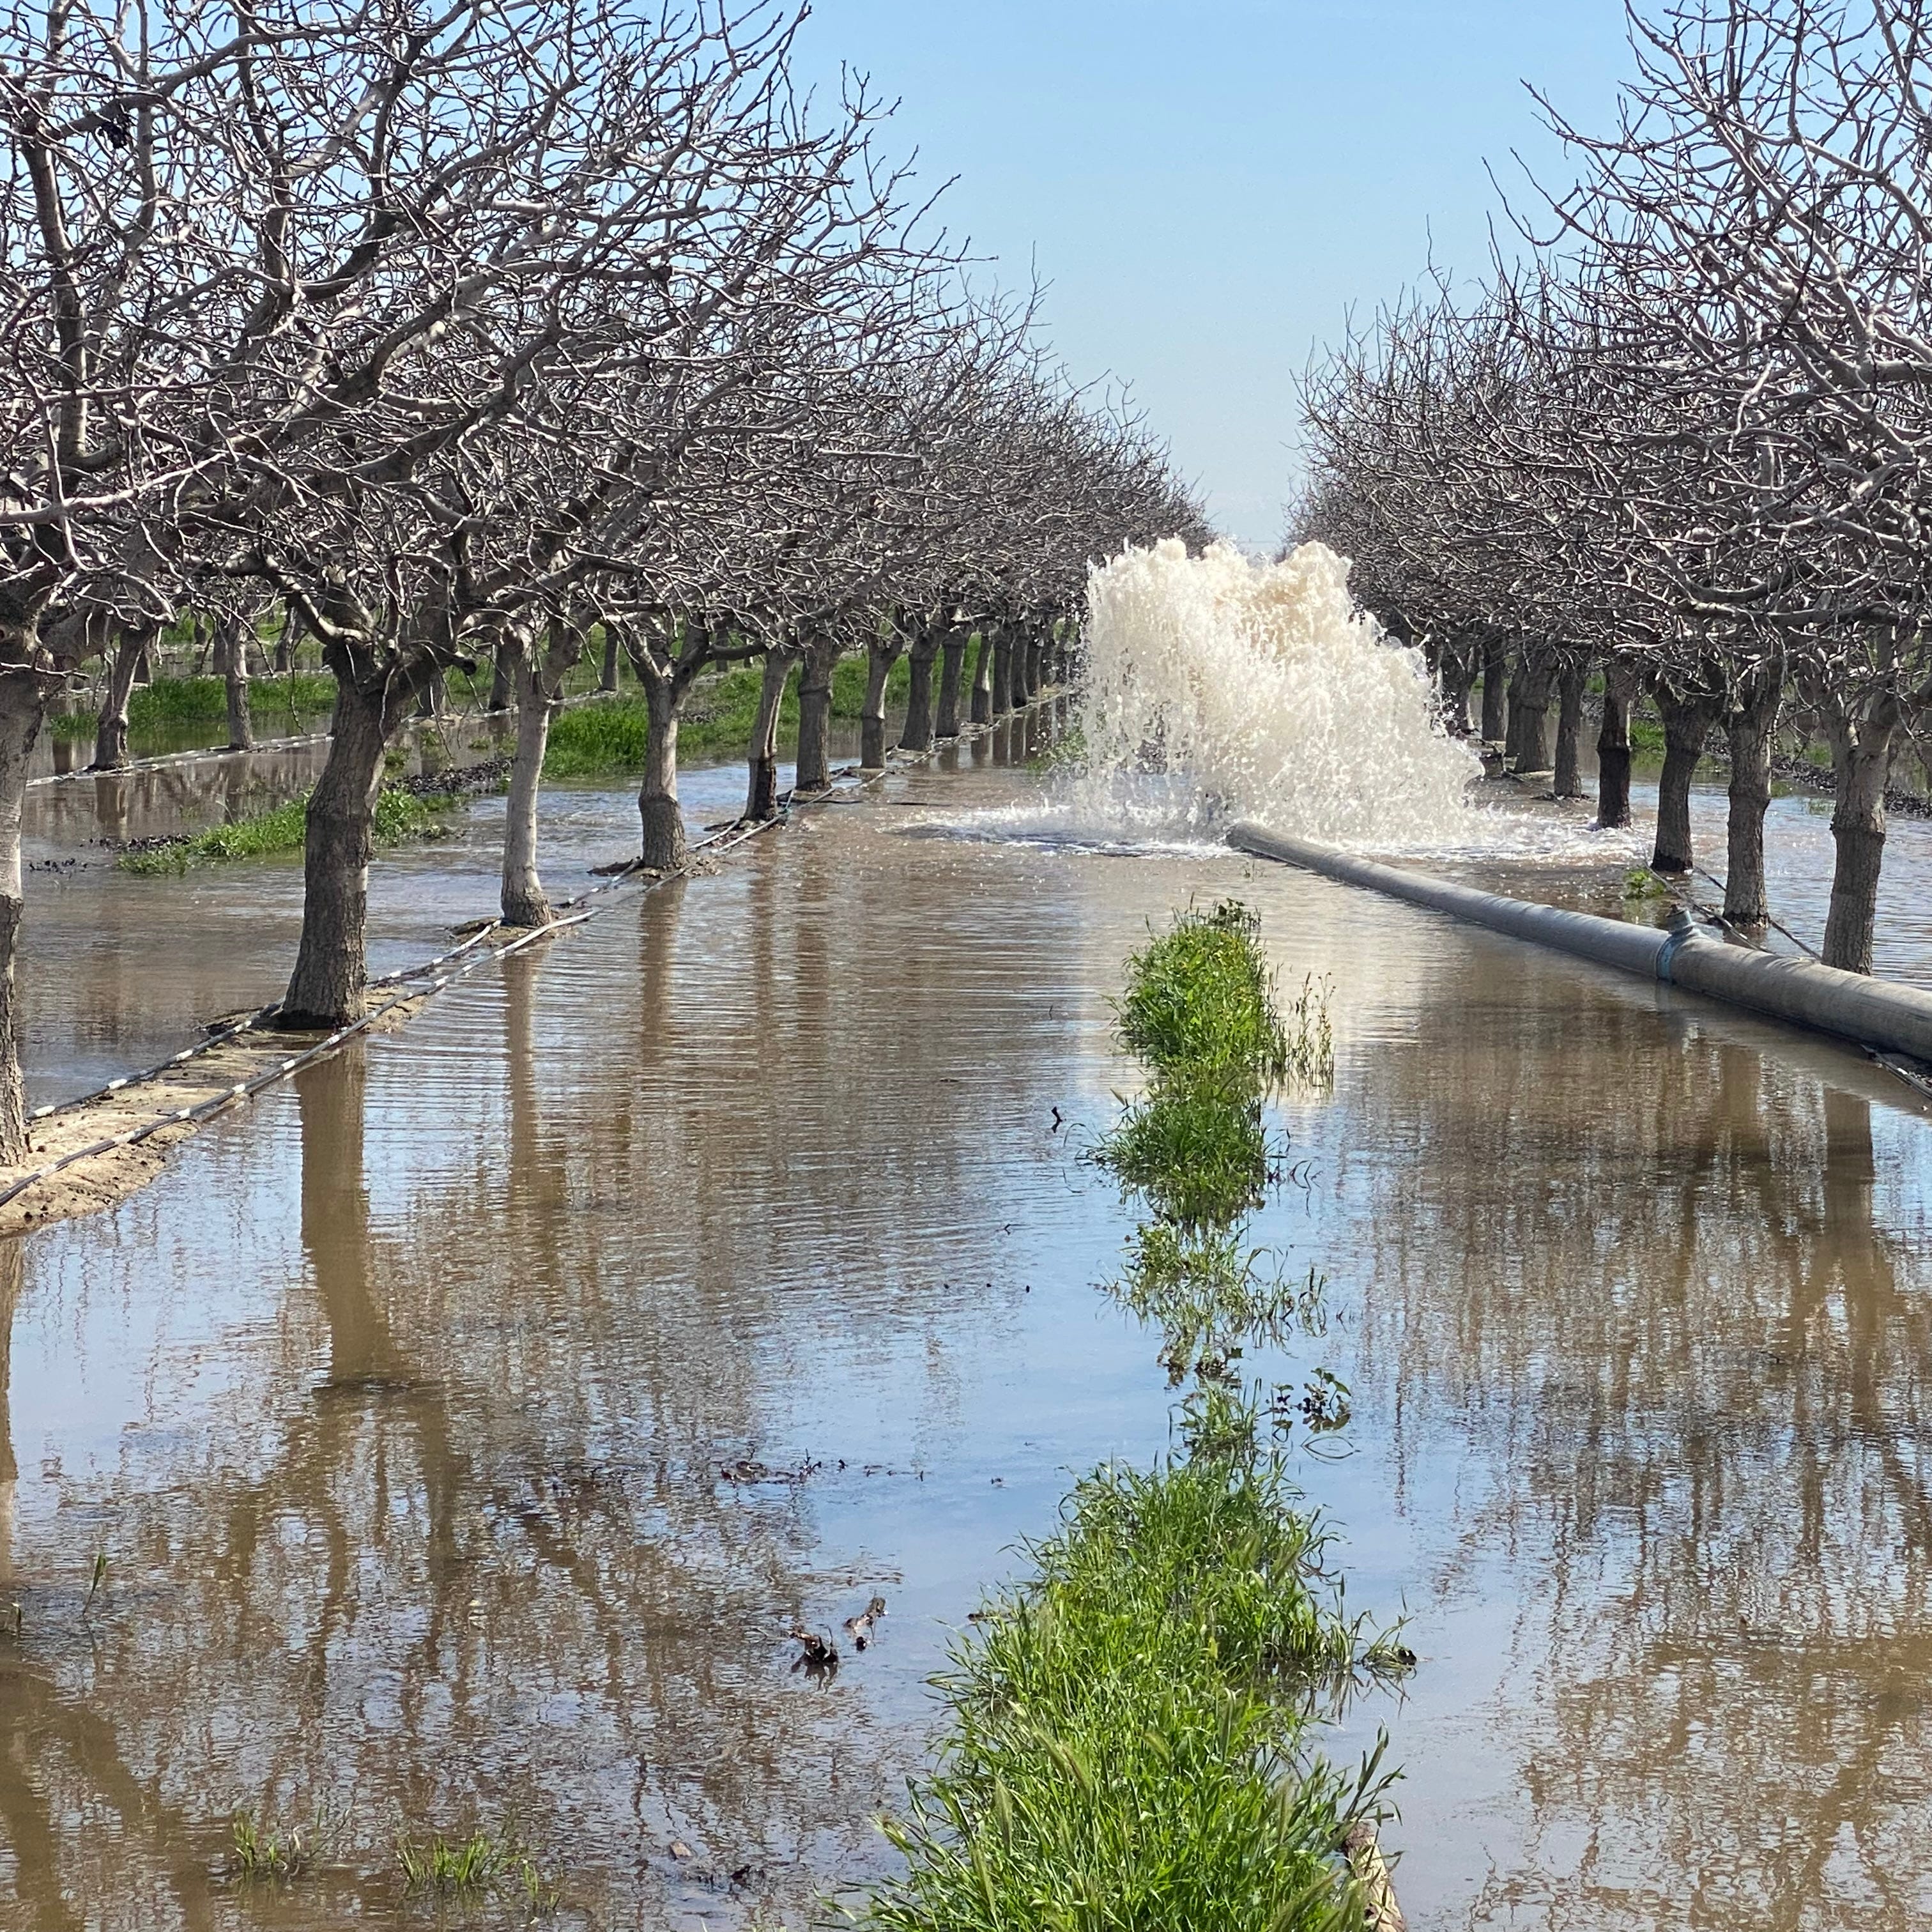 Water gushing from a pipe to flood a pistachio orchard owned by California farmer Don Cameron on March 18 2023. As the massive snows of the winter of 2022-2023 begin to melt, the north fork of the Kings river that runs alongside his farm is brimming. He is pumping 70,000 gallons of water a minute into his fields to flood them, allowing the water to soak deep into the earth and recharge the underground aquifers he relies on to irrigate in dry years.